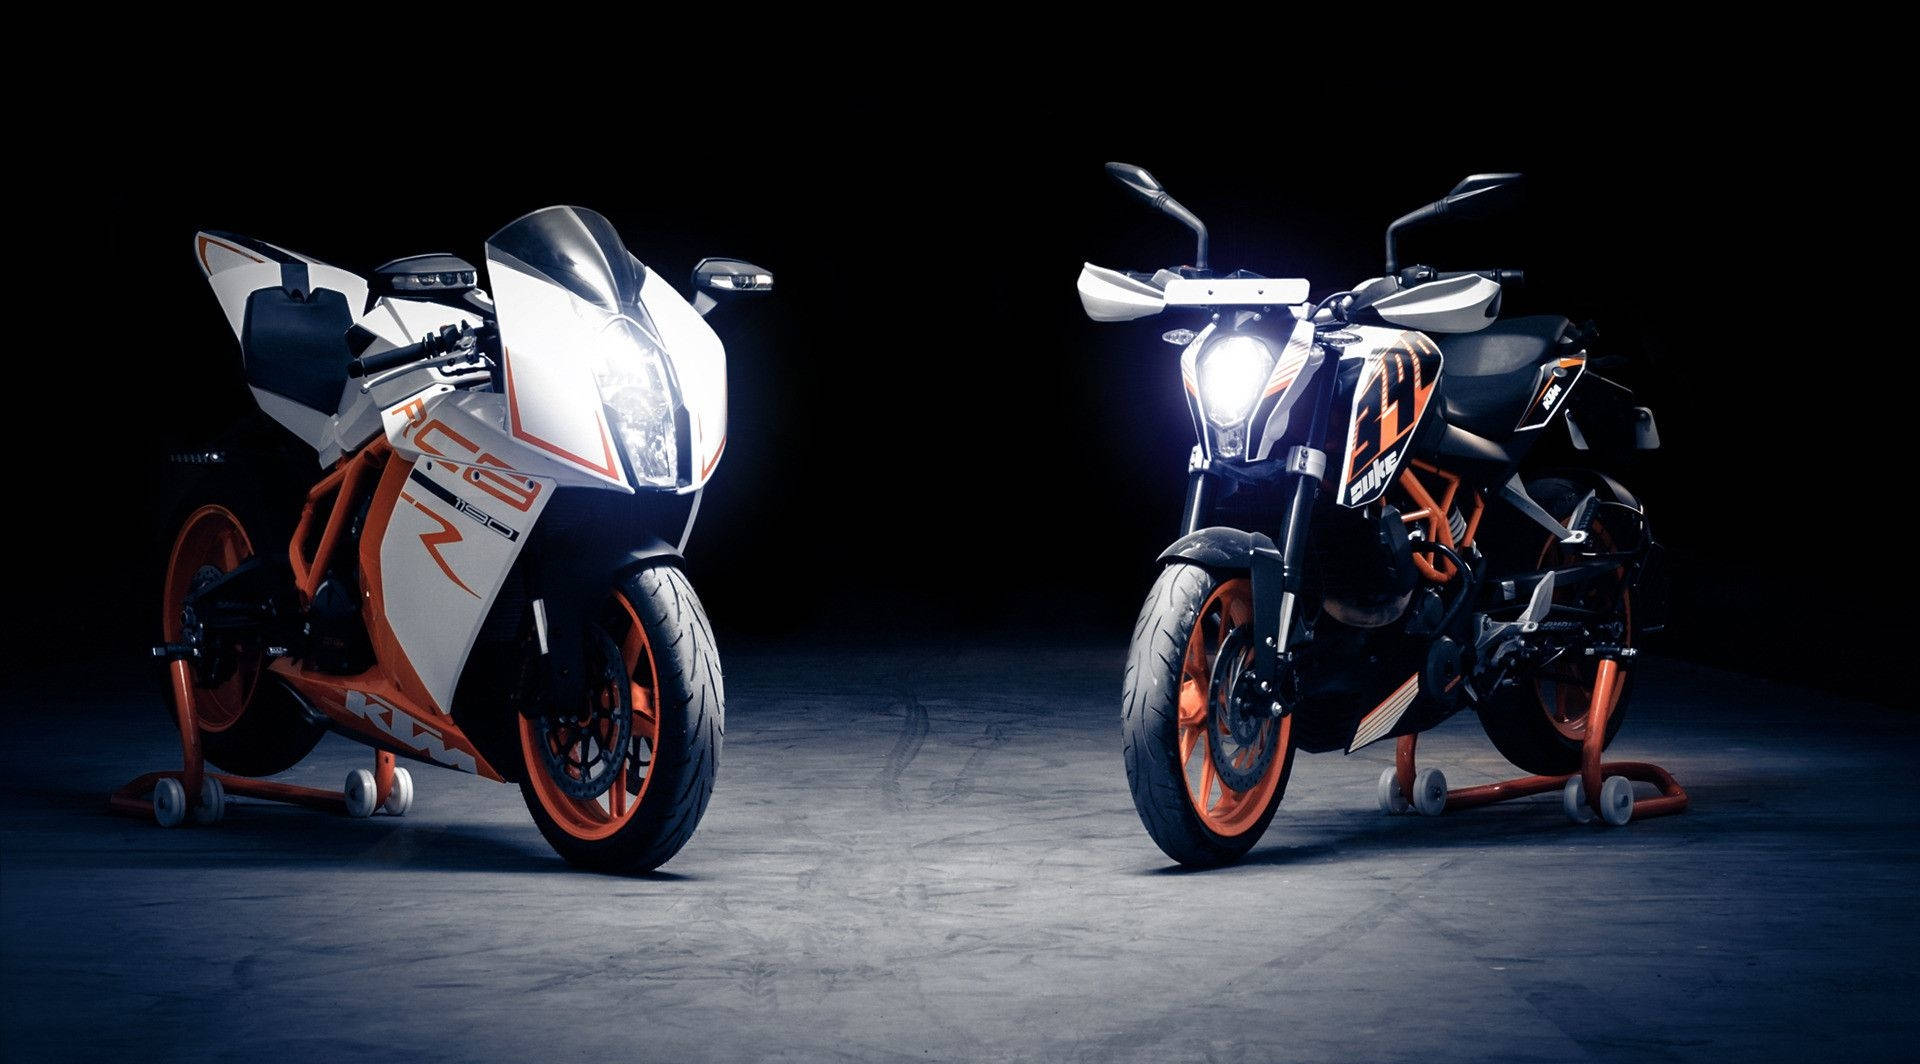 The Dynamic Duo - Ktm Duke 390 & Ktm 1190 Rc8 In Raw Action Background